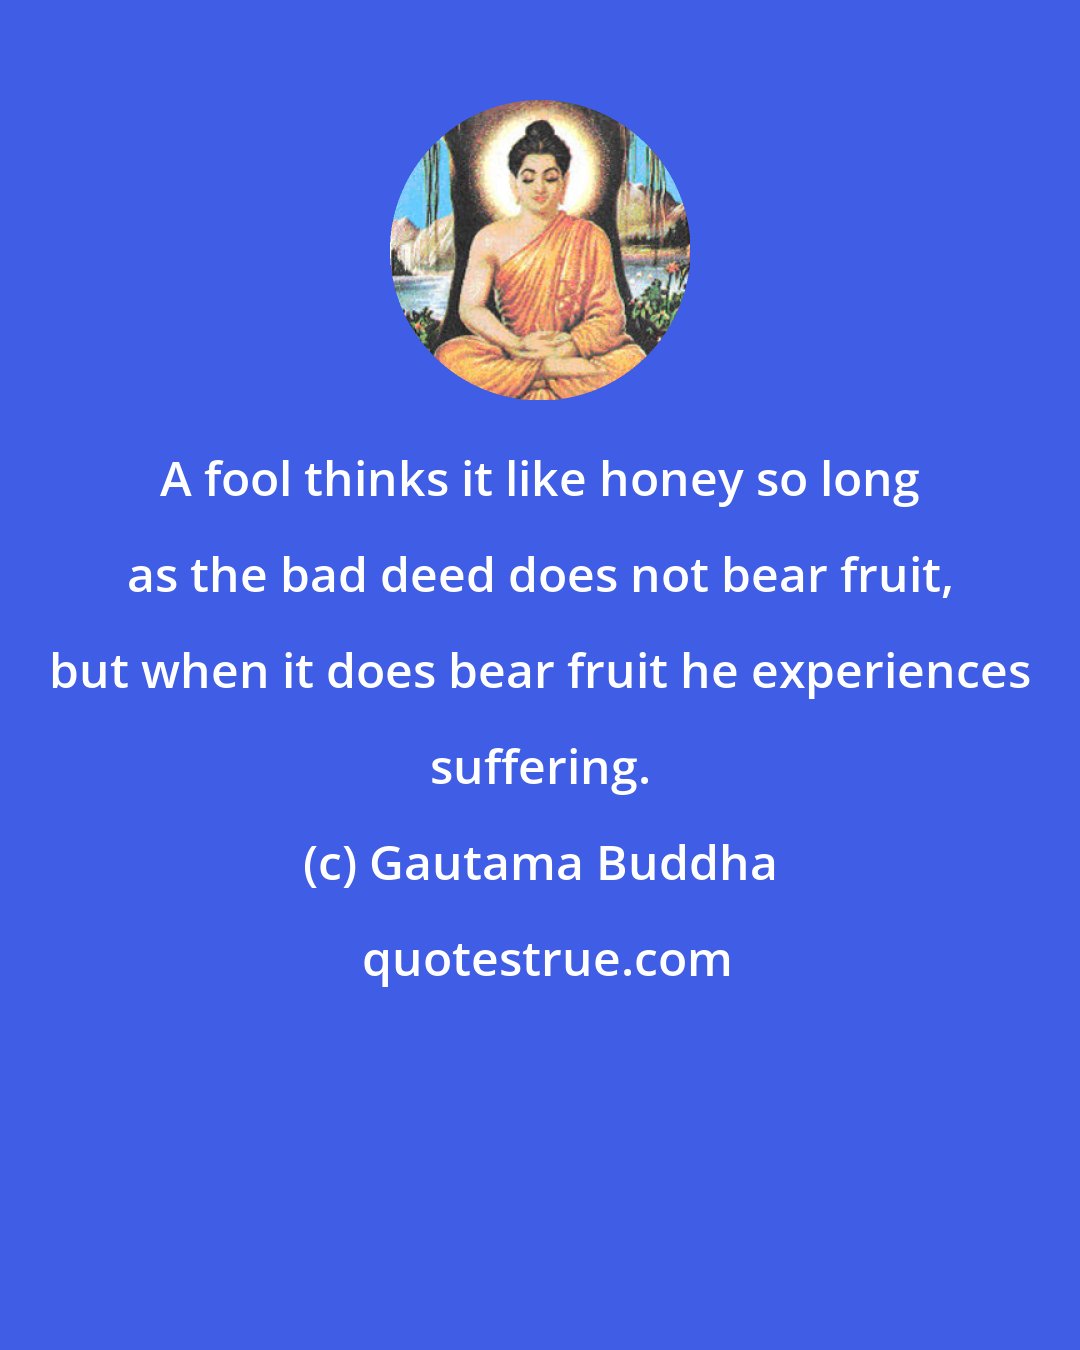 Gautama Buddha: A fool thinks it like honey so long as the bad deed does not bear fruit, but when it does bear fruit he experiences suffering.